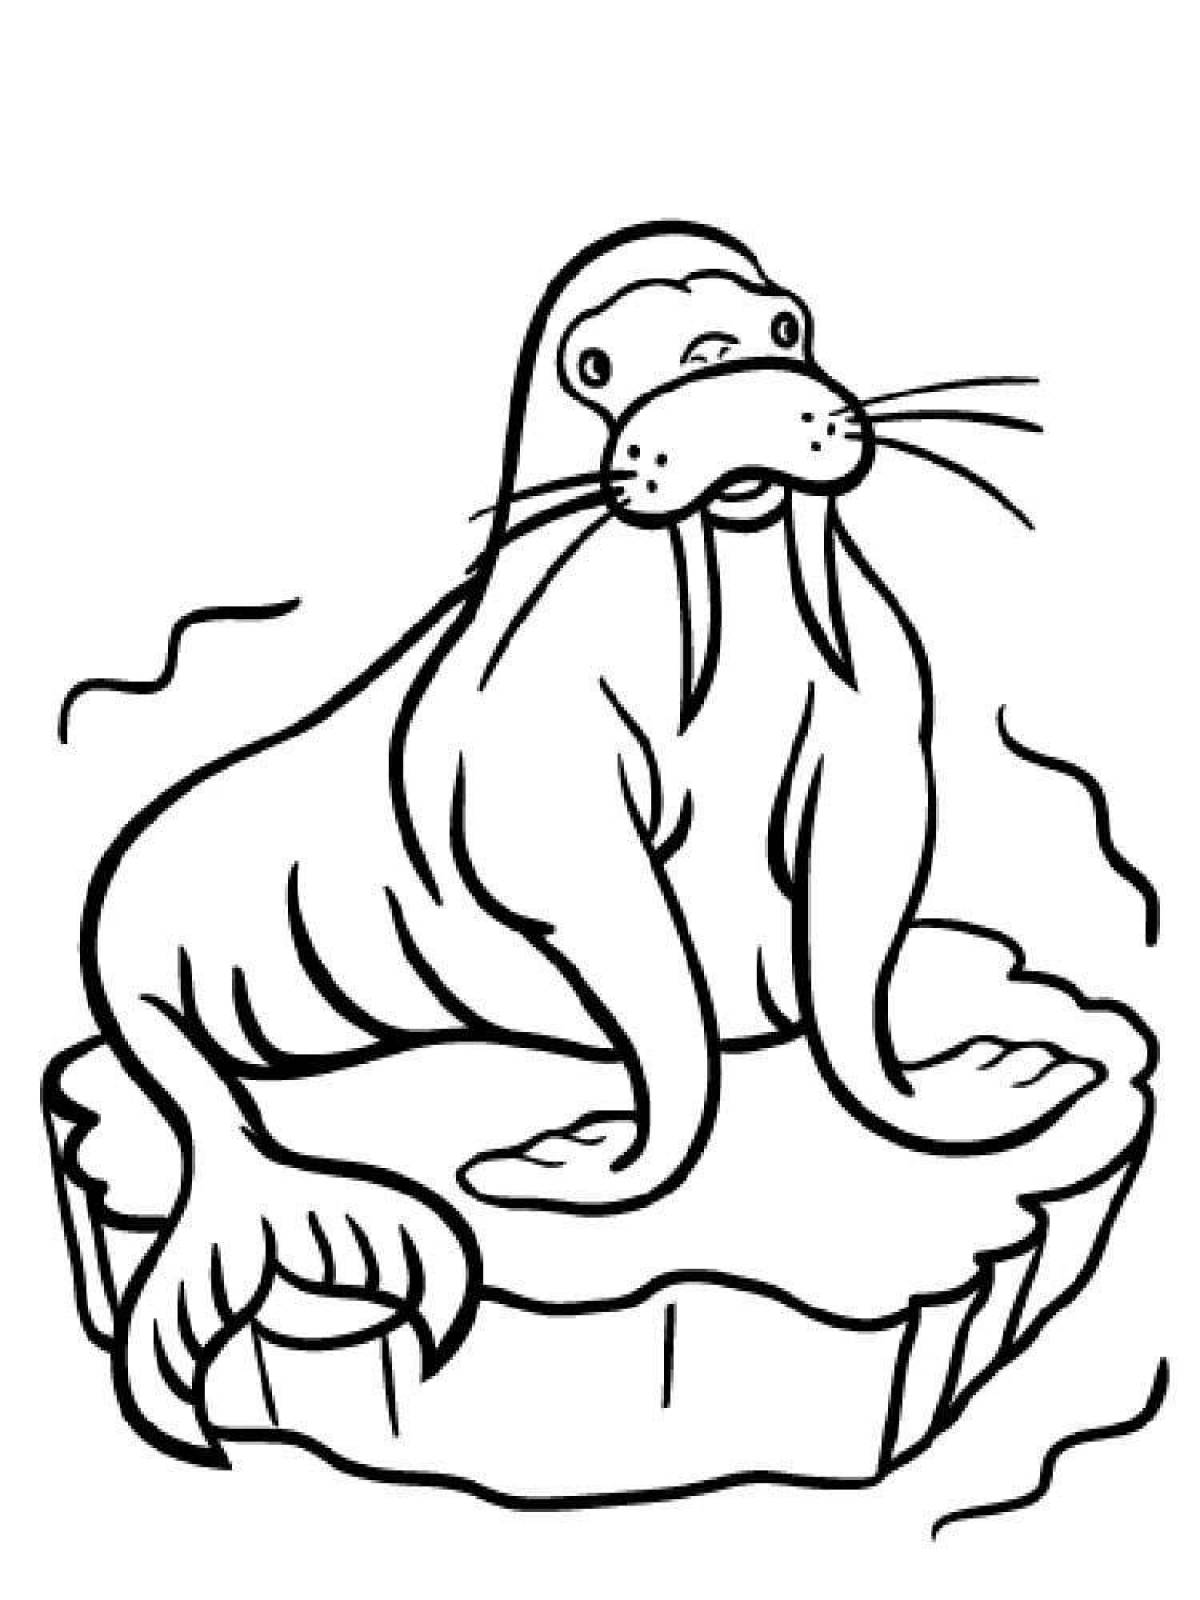 Playful walrus coloring page for kids